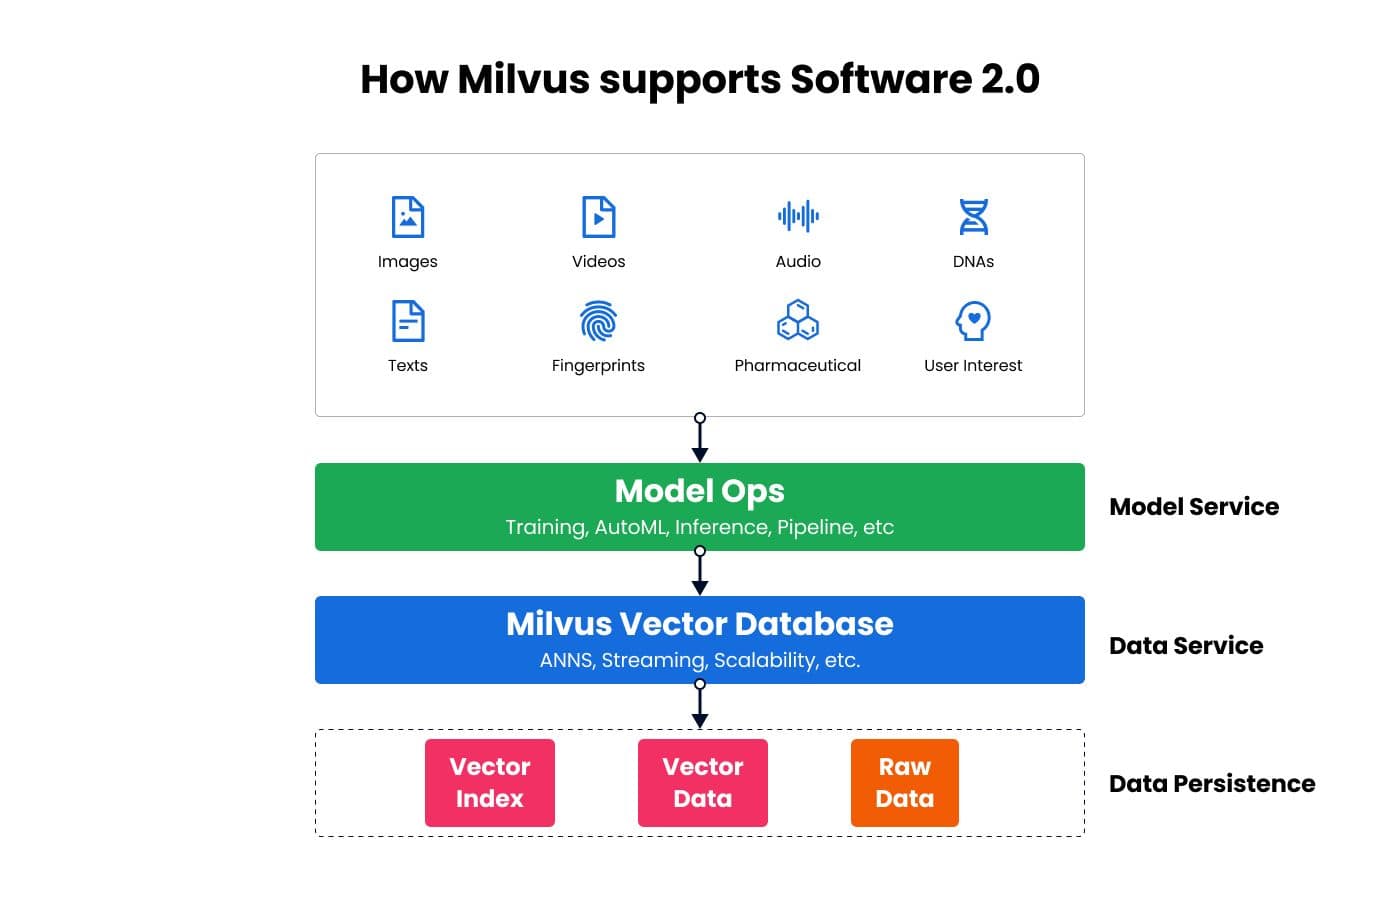 How Milvus supports the transition to Software 2.0.